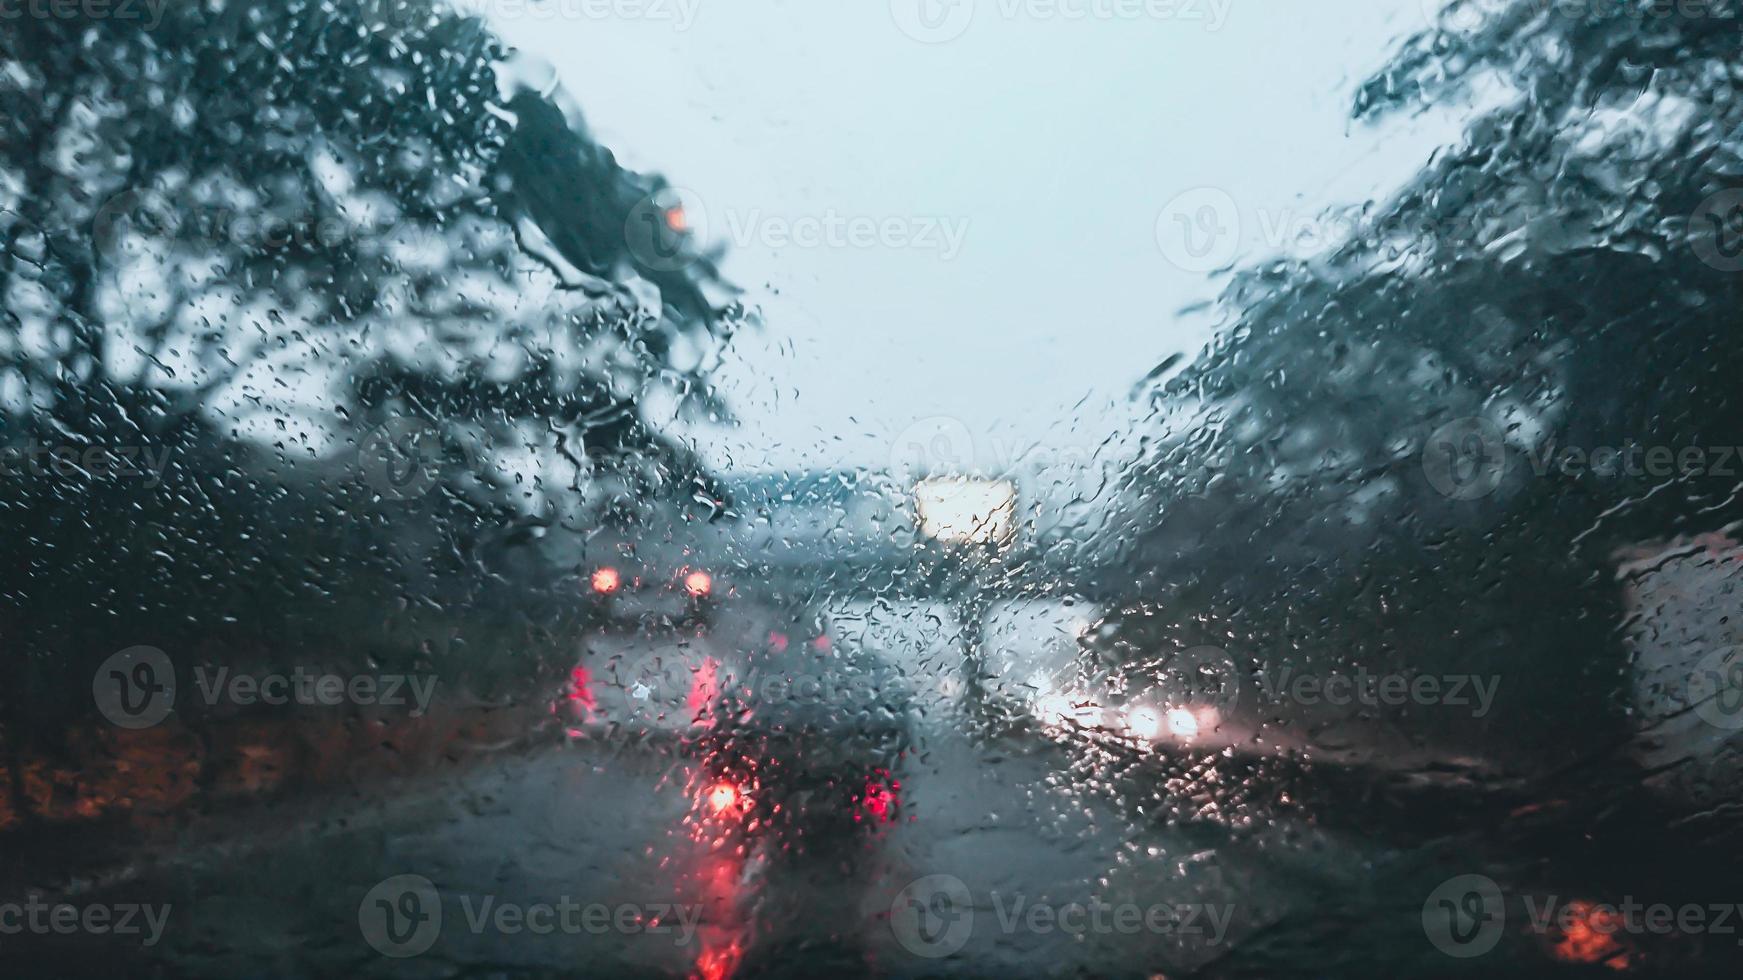 Blurry photo of windshield with heavy rain, view form inside a car driving